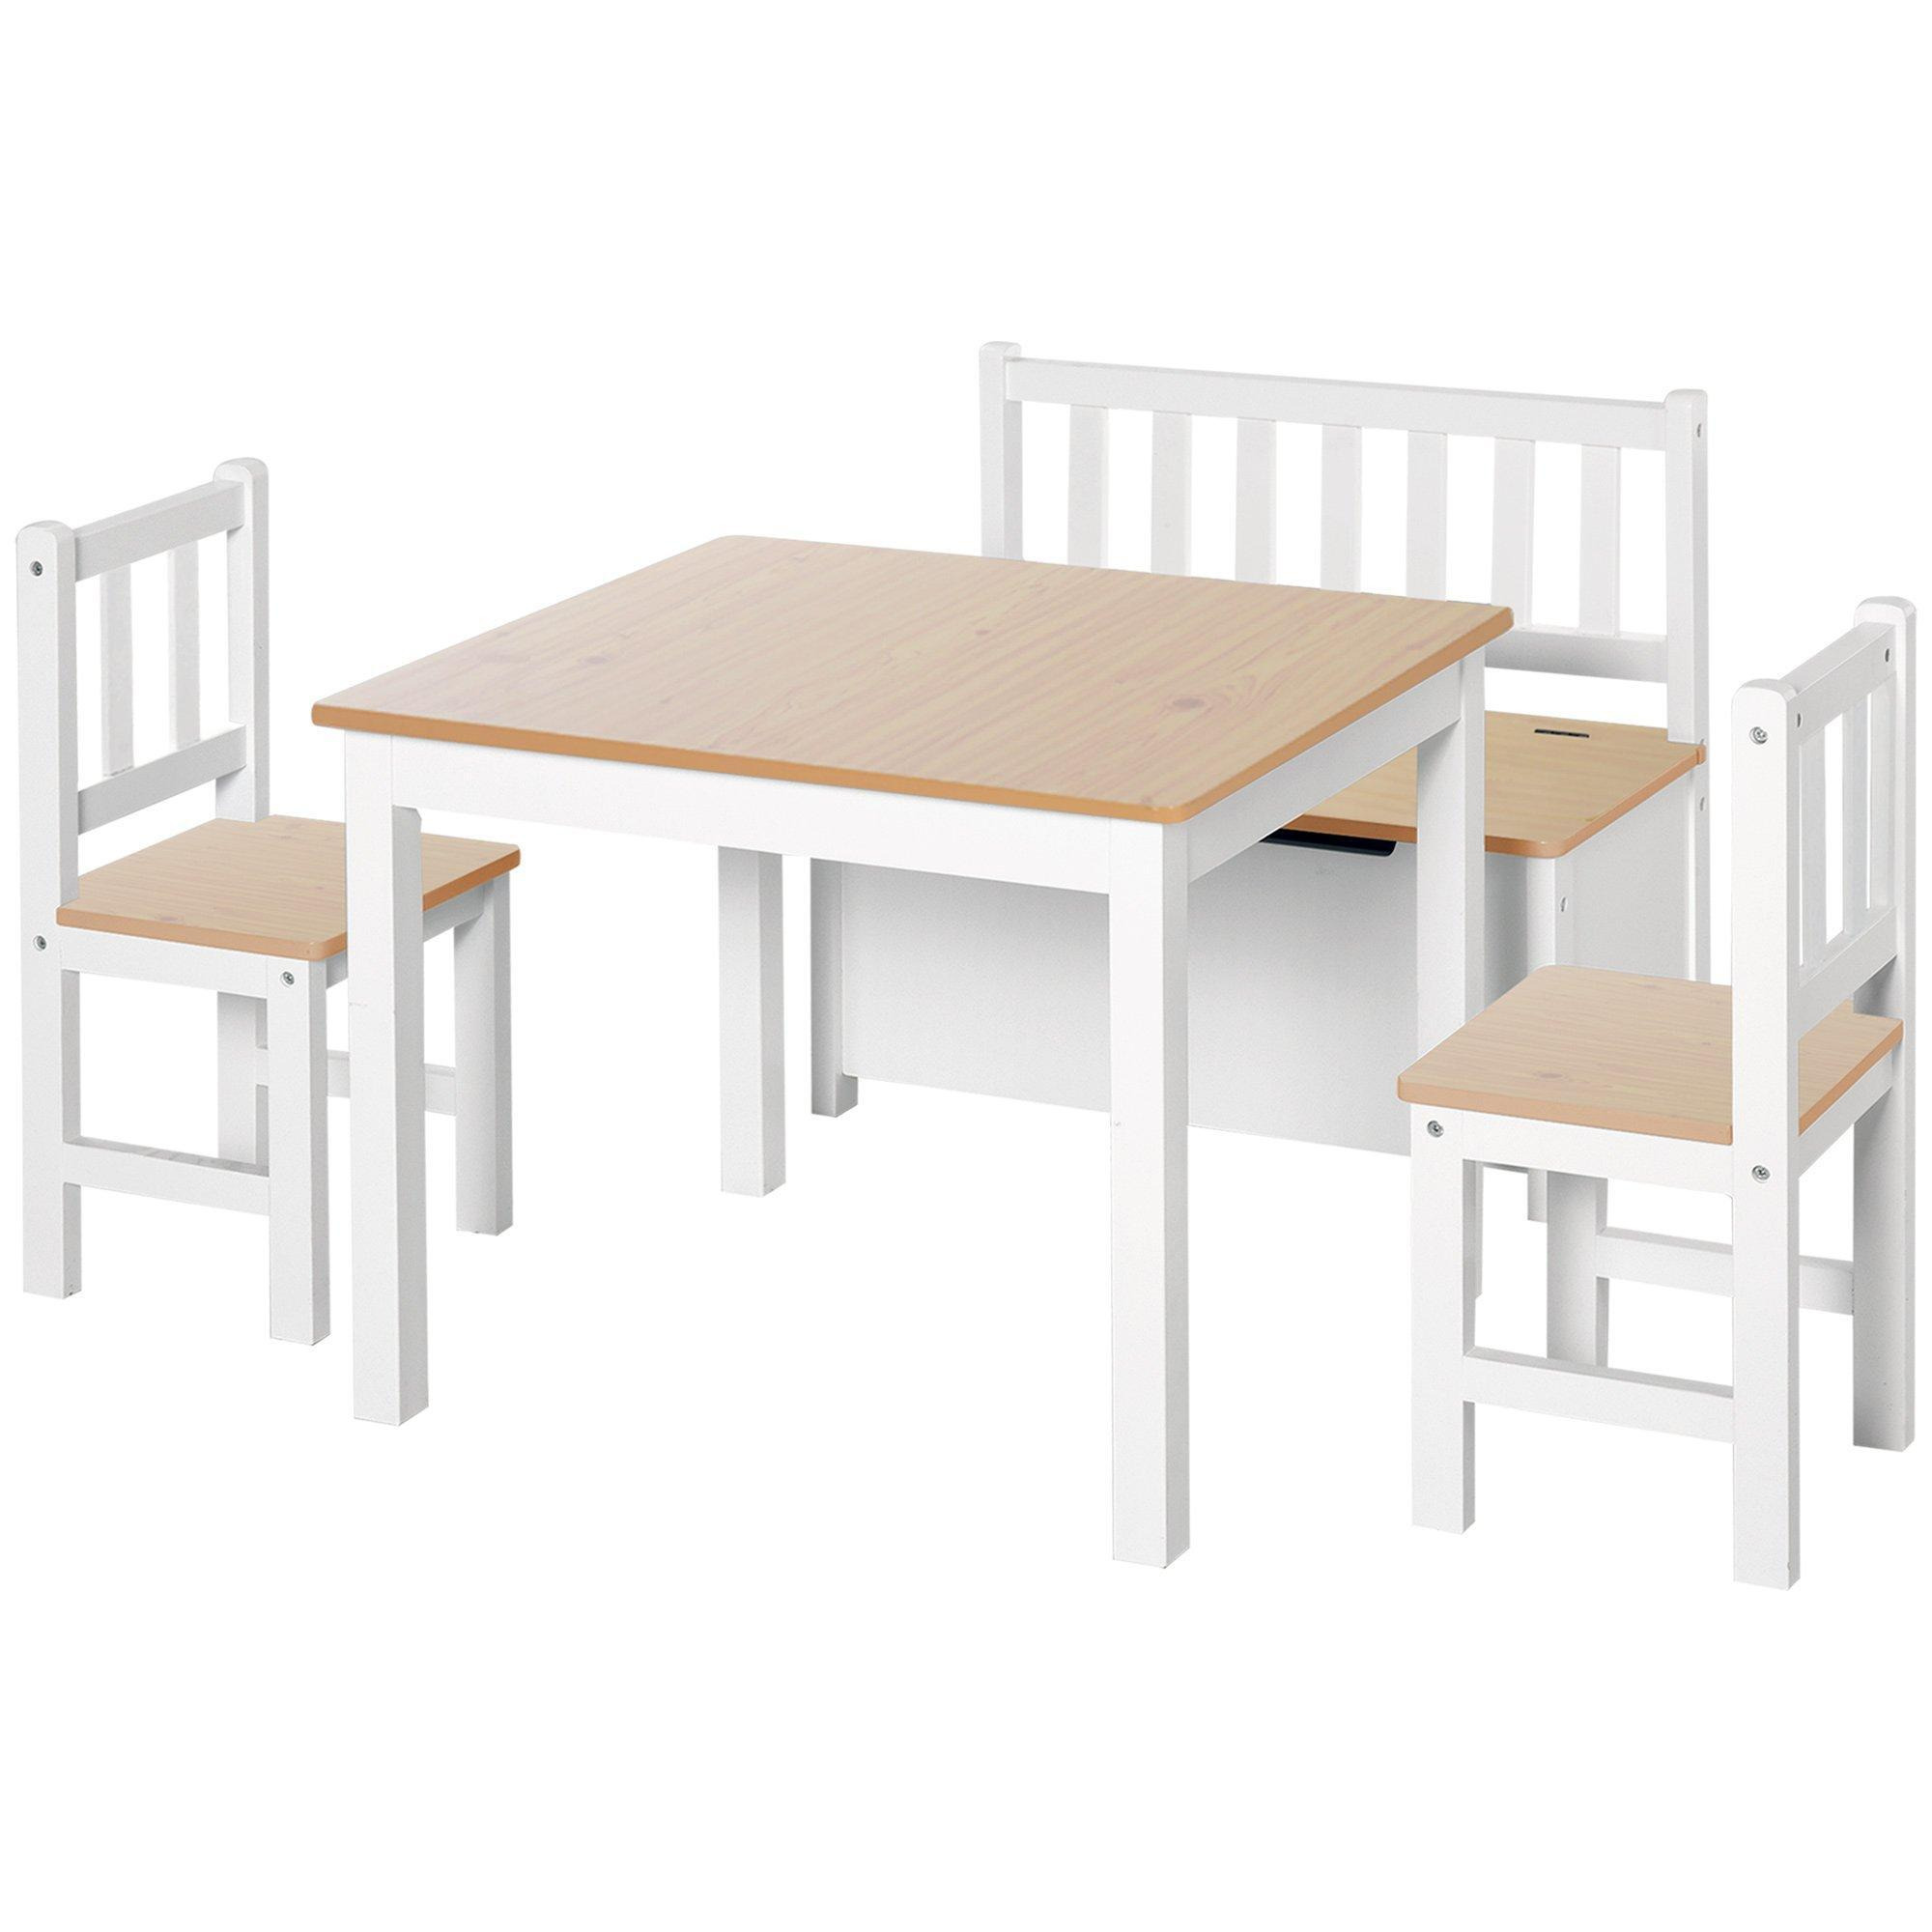 4-Piece Table and Chair Wood Bench with Storage Feature, Gift for Toddlers - image 1